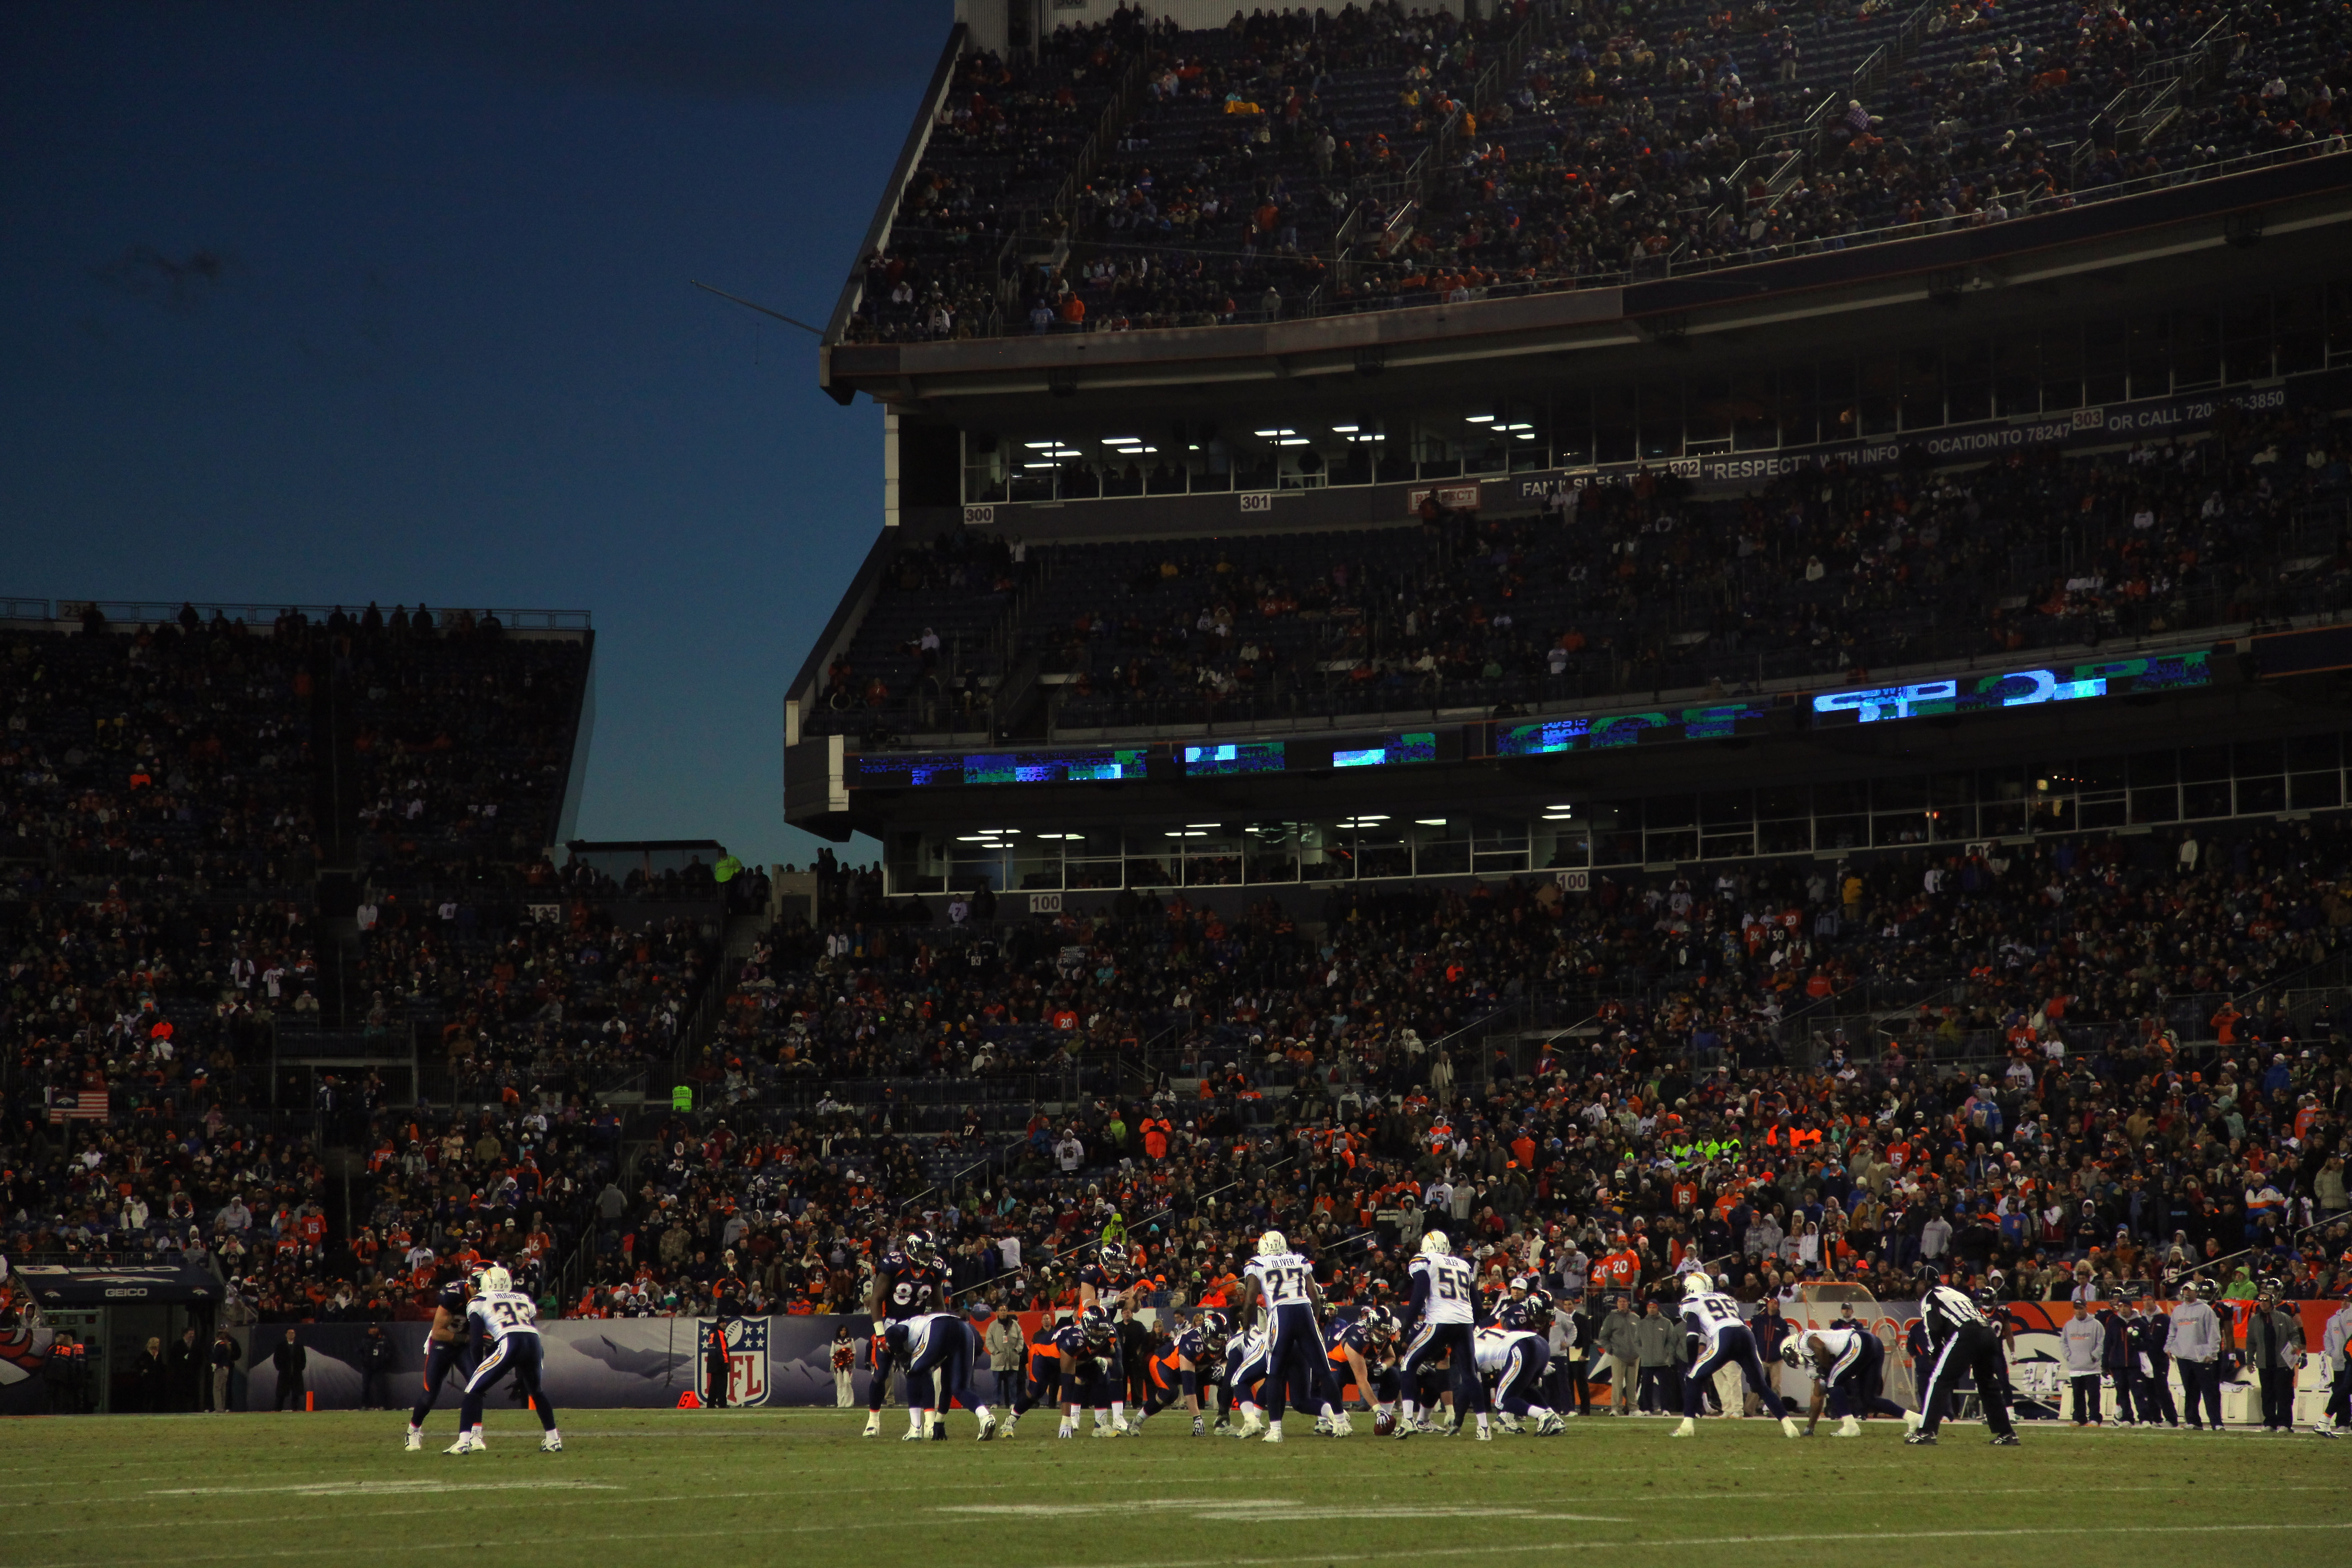 DENVER - JANUARY 02:  General view of the stadium as the Denver Broncos face the San Diego Chargers at INVESCO Field at Mile High on January 2, 2011 in Denver, Colorado. The Chargers defeated the Broncos 33-28.  (Photo by Doug Pensinger/Getty Images)